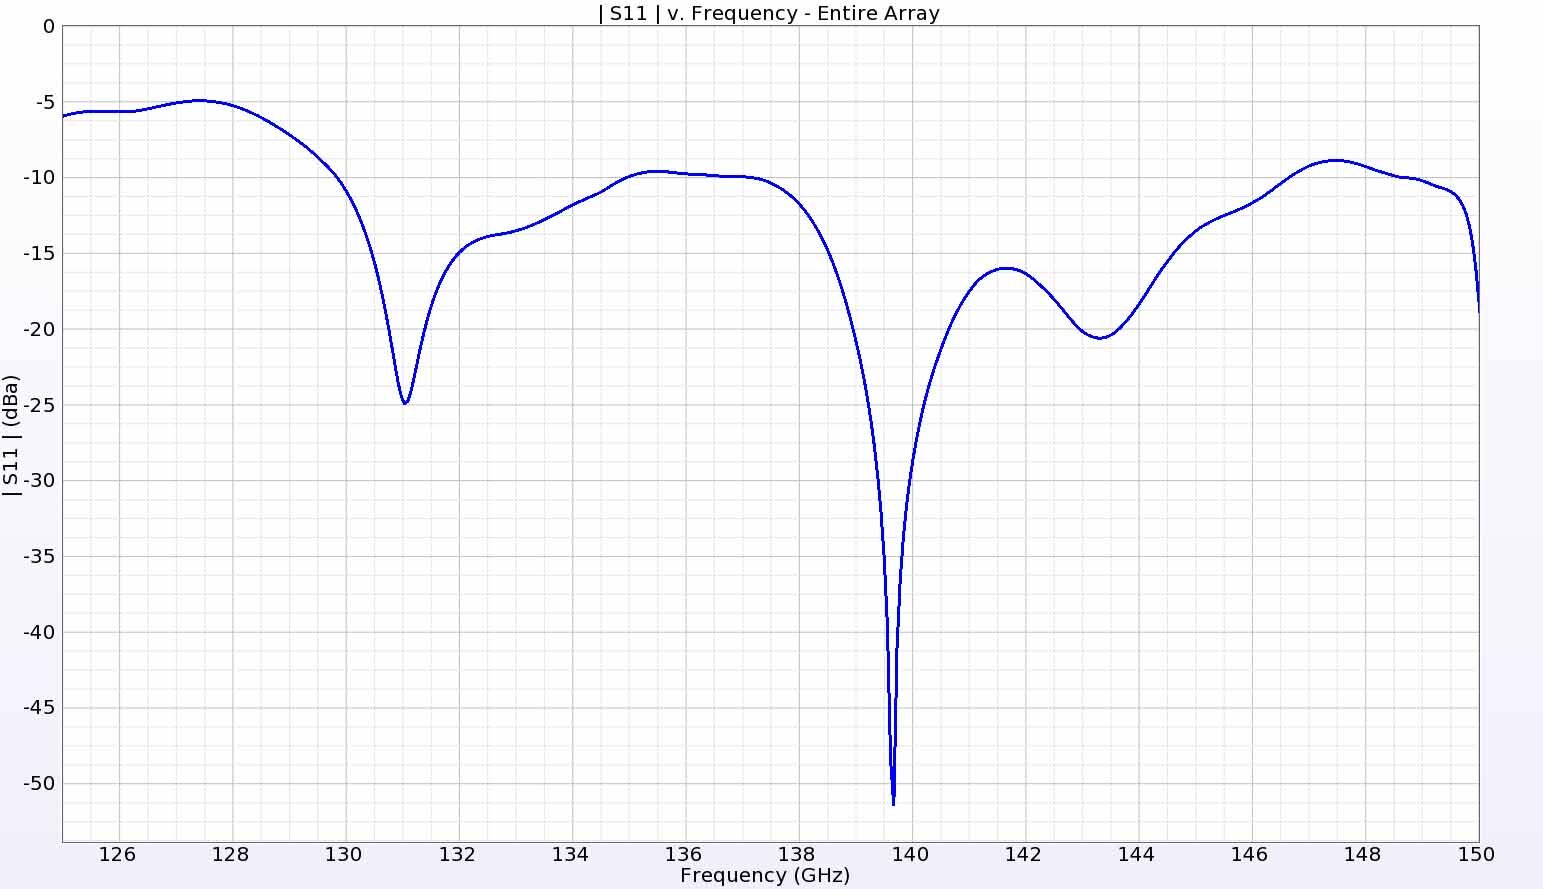 Figure 18:  The return loss for the entire array is mostly below -10 dB from 130 to 146 GHz.